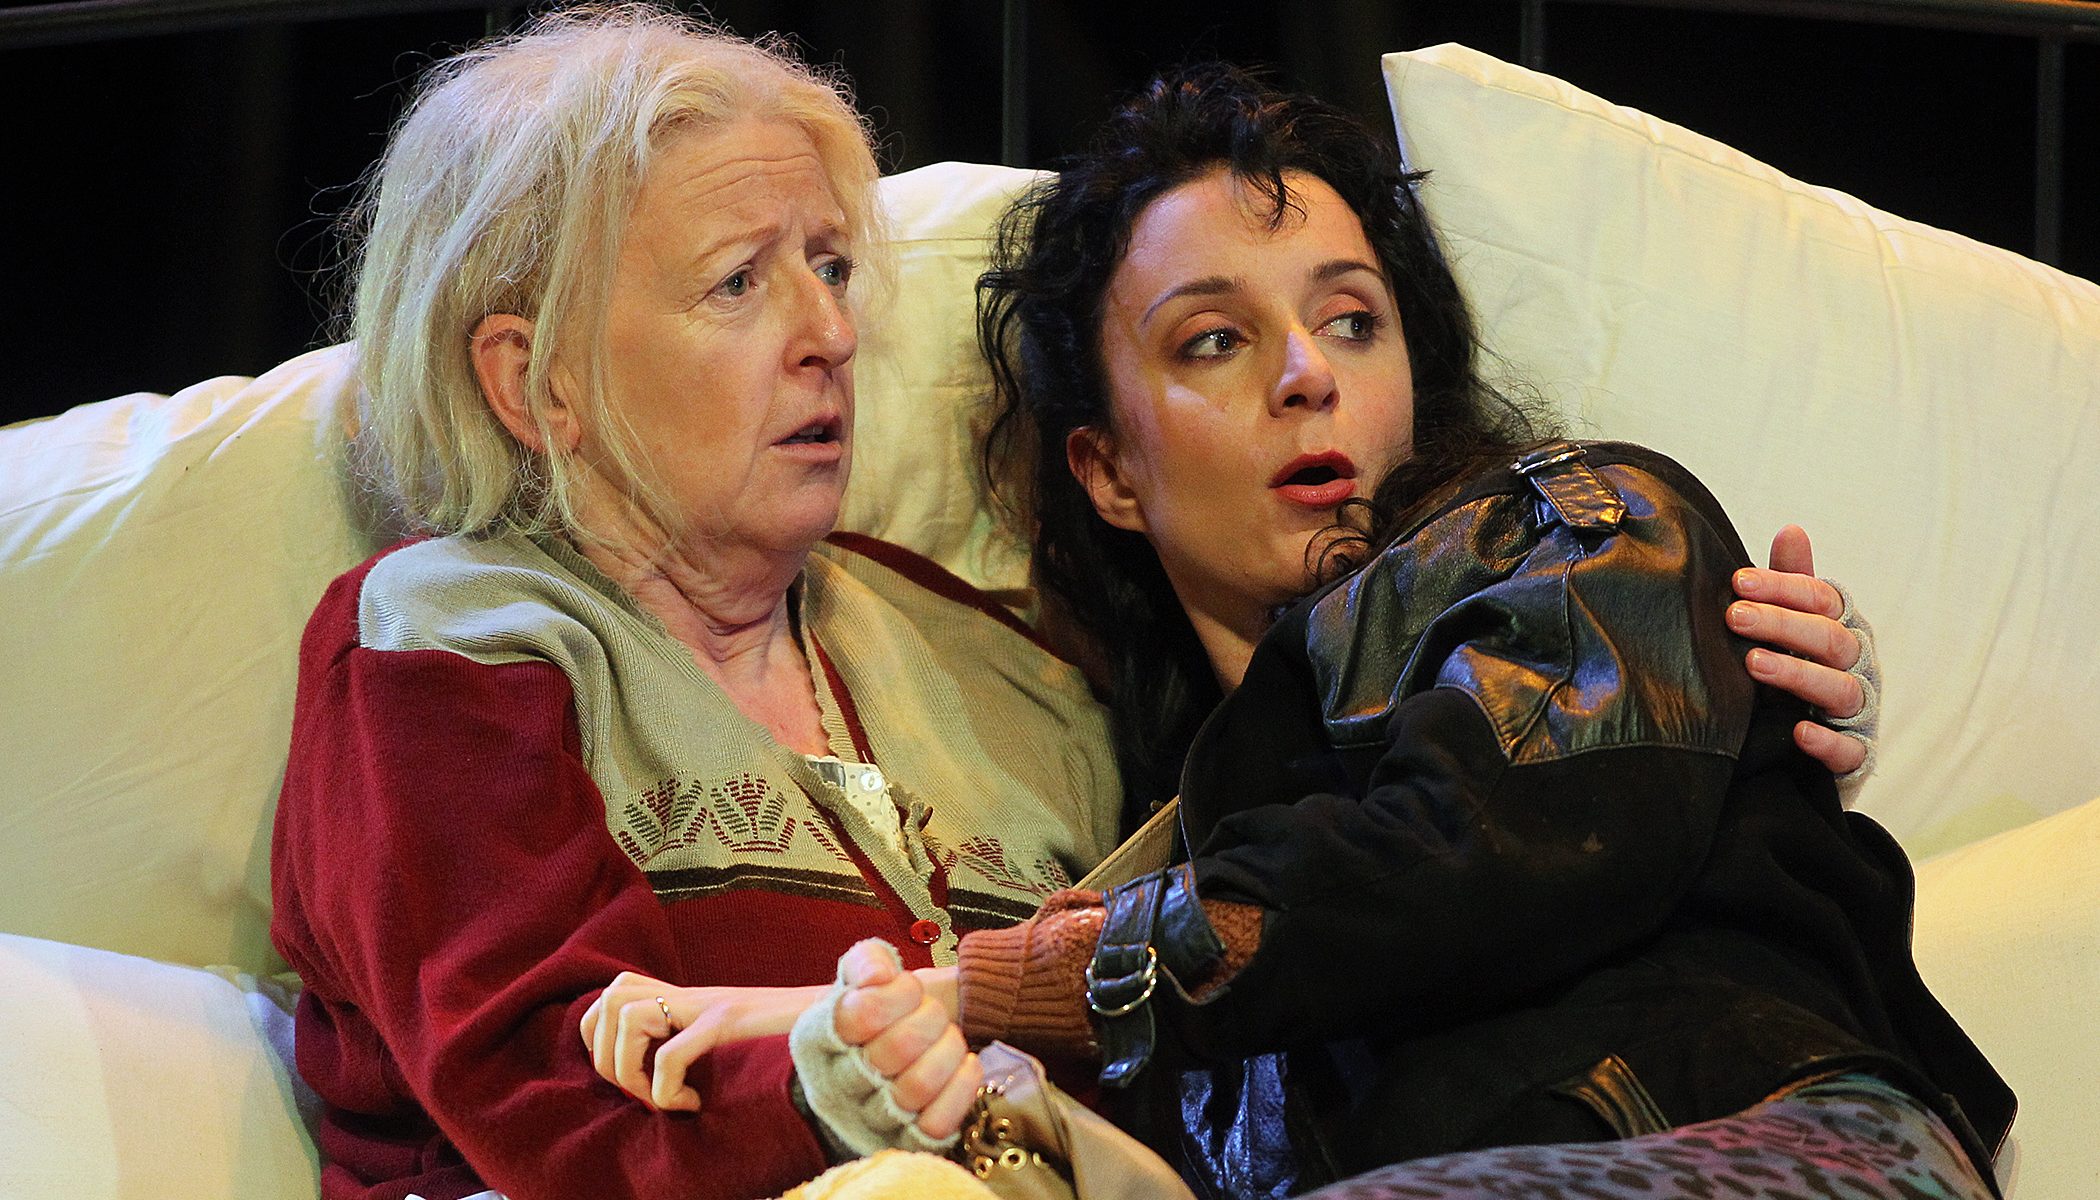 Joan Sheehy as Mommo and Maeve Fitzgerald as Dolly in Tom Murphy's Bailegangaire